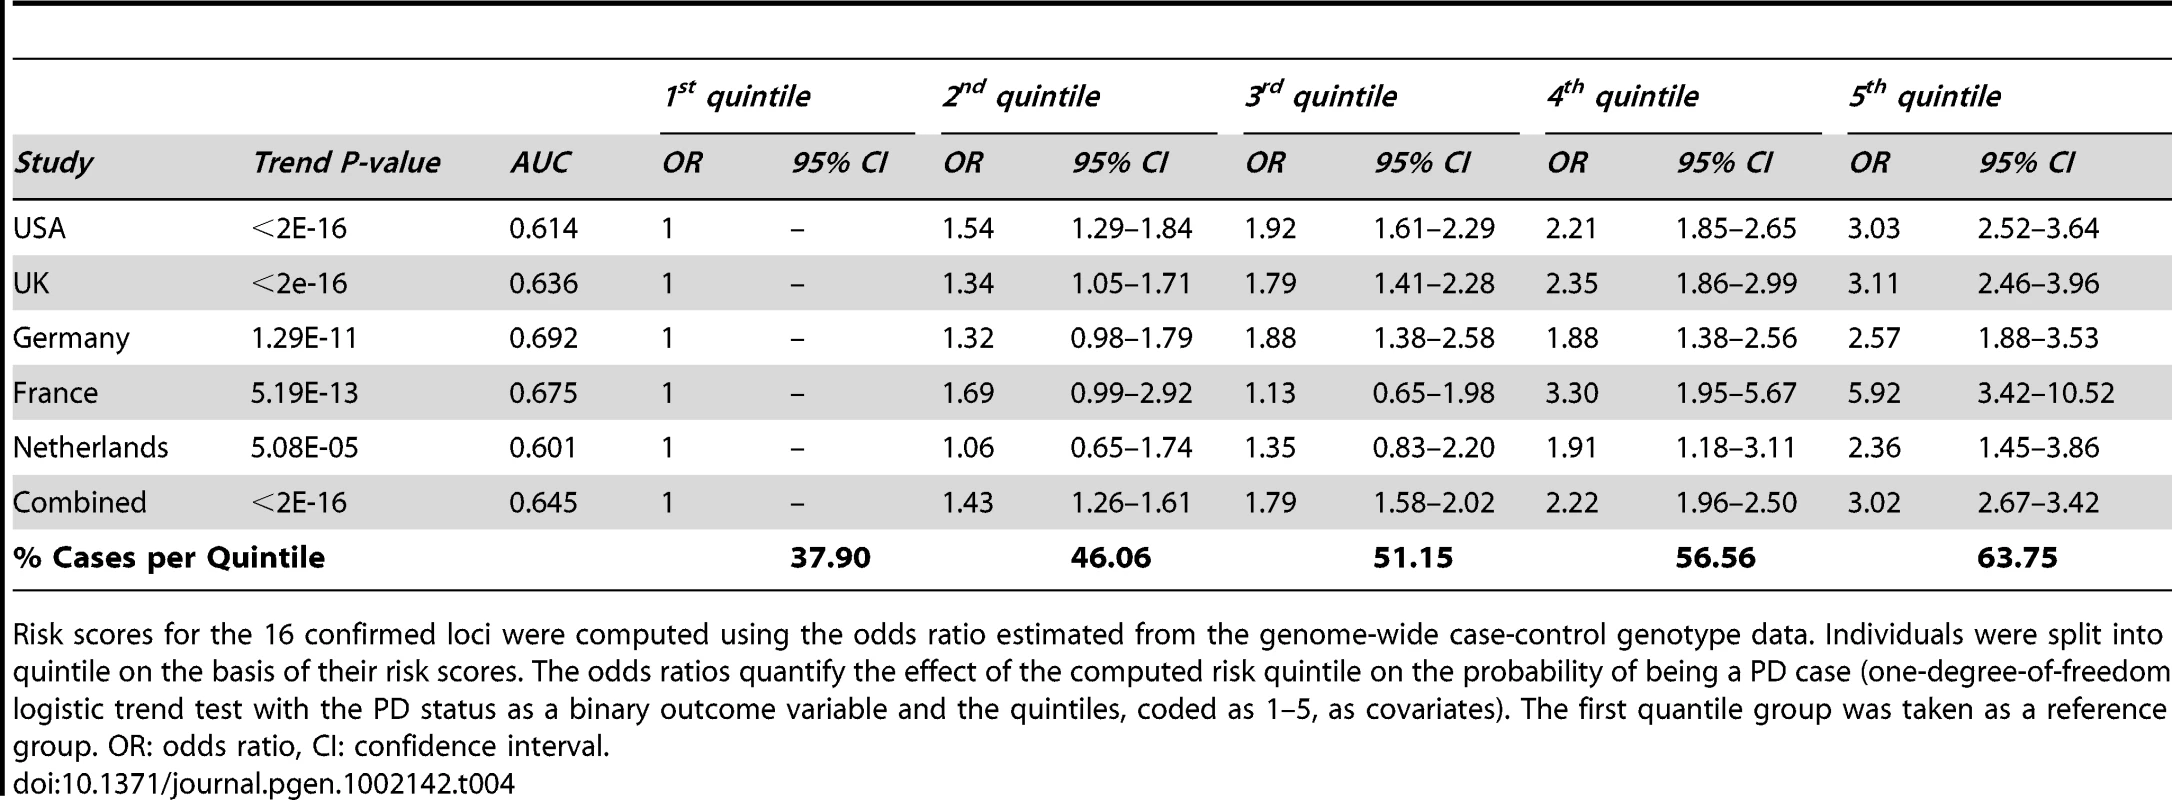 Estimated PD risk profile for the five cohorts genotyped using the Immunochip.